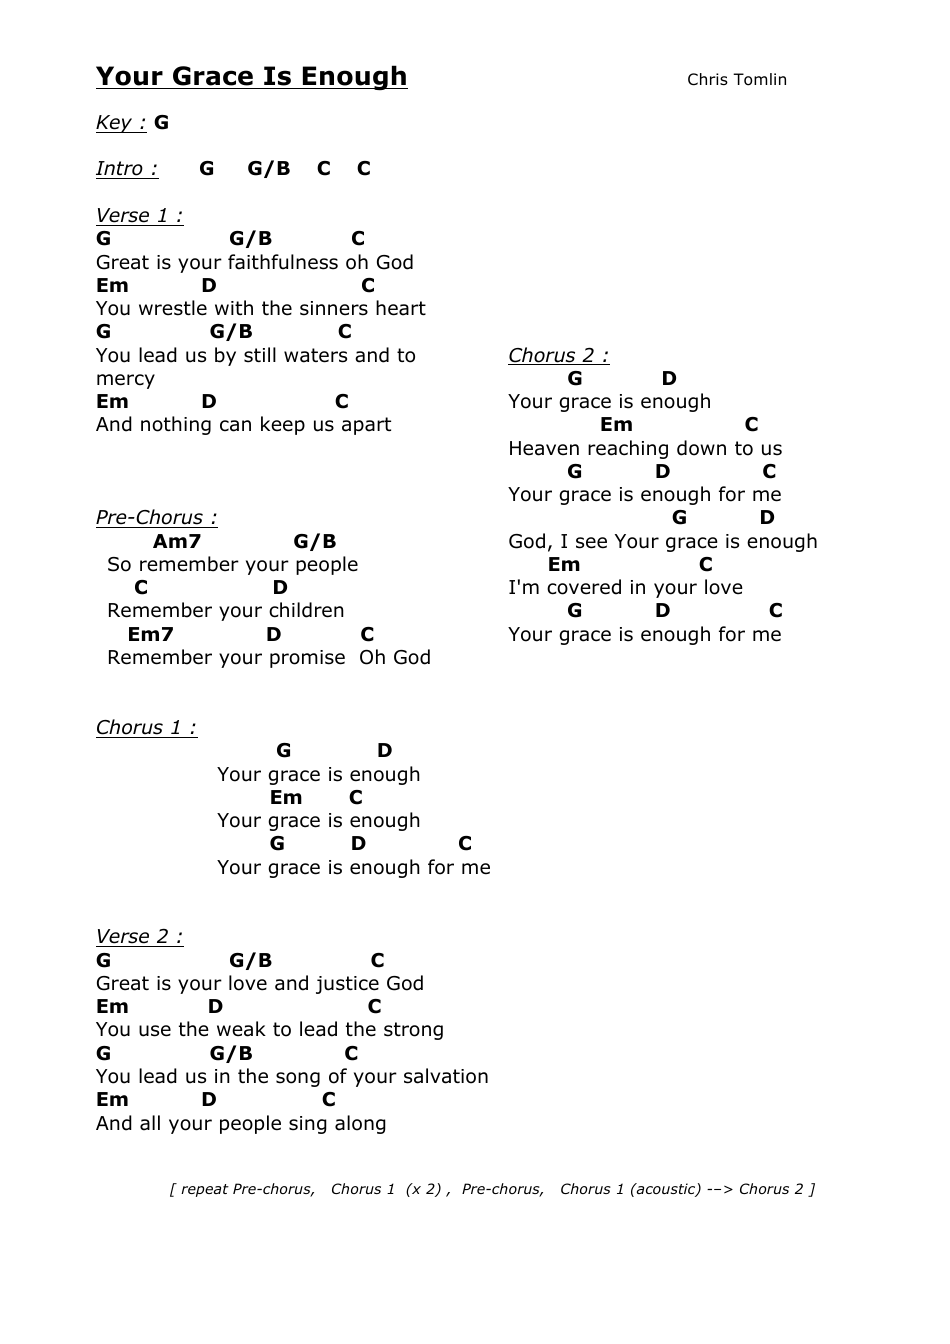 Chris Tomlin - Your Grace Is Enough (G) Chord Chart Image